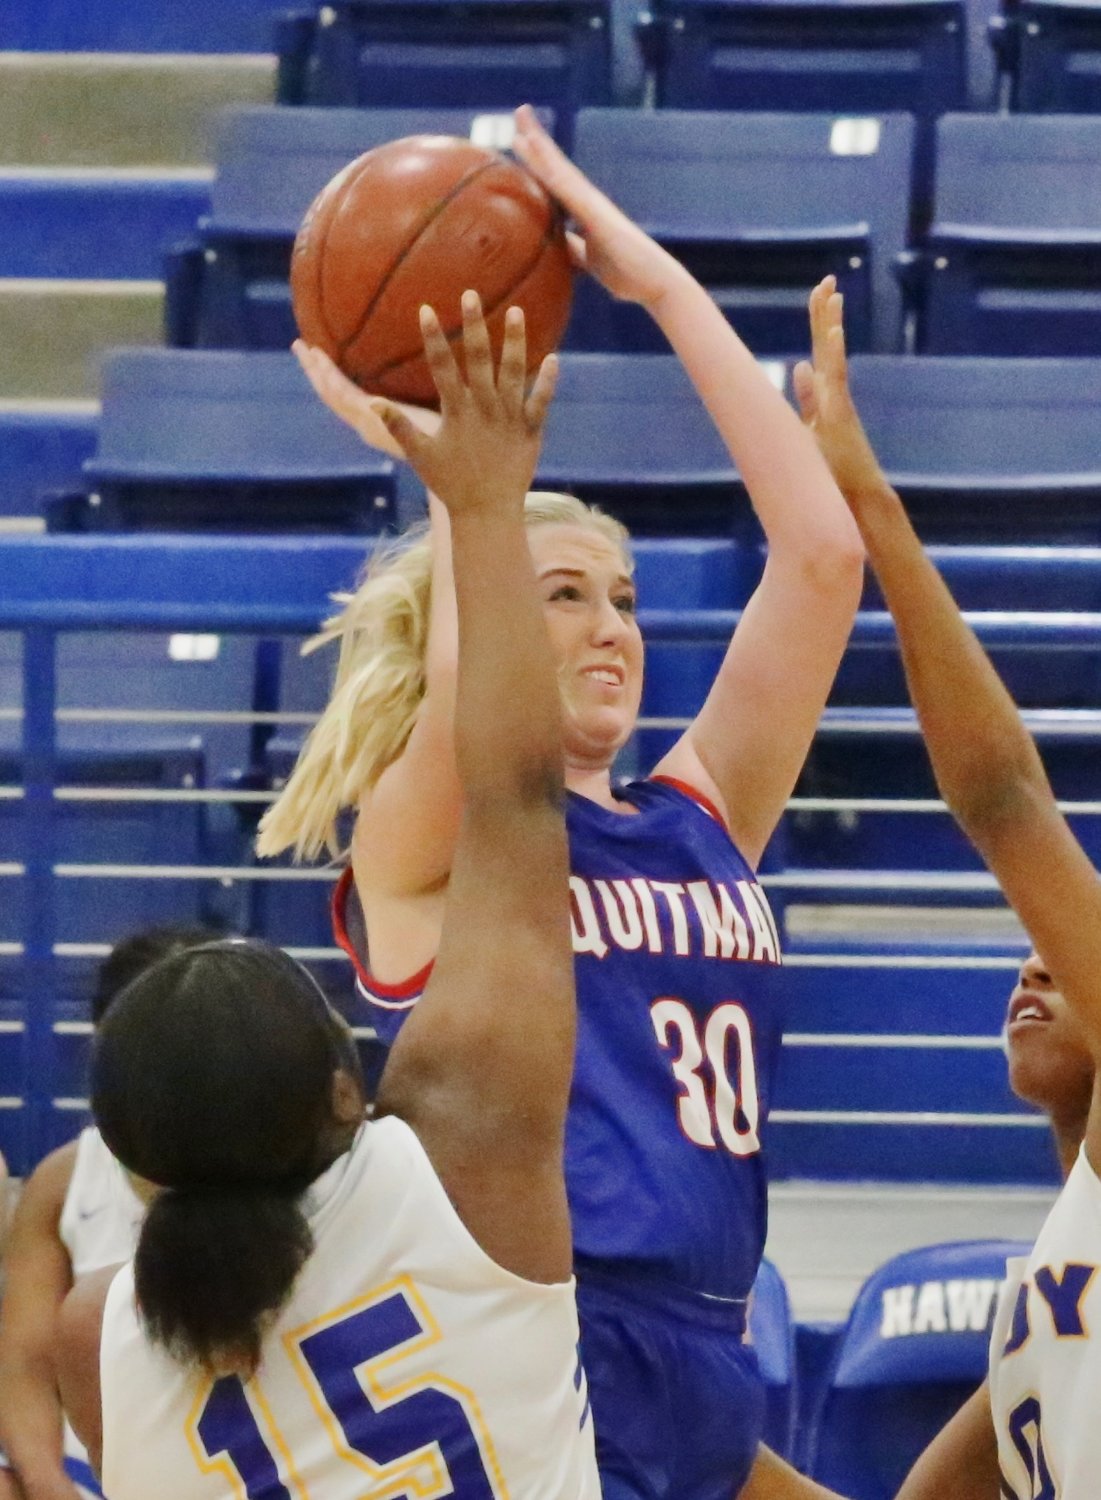 Lady Bulldog Maddy Whitehurst continued her excellent scoring season at the Hawkins Tournament.